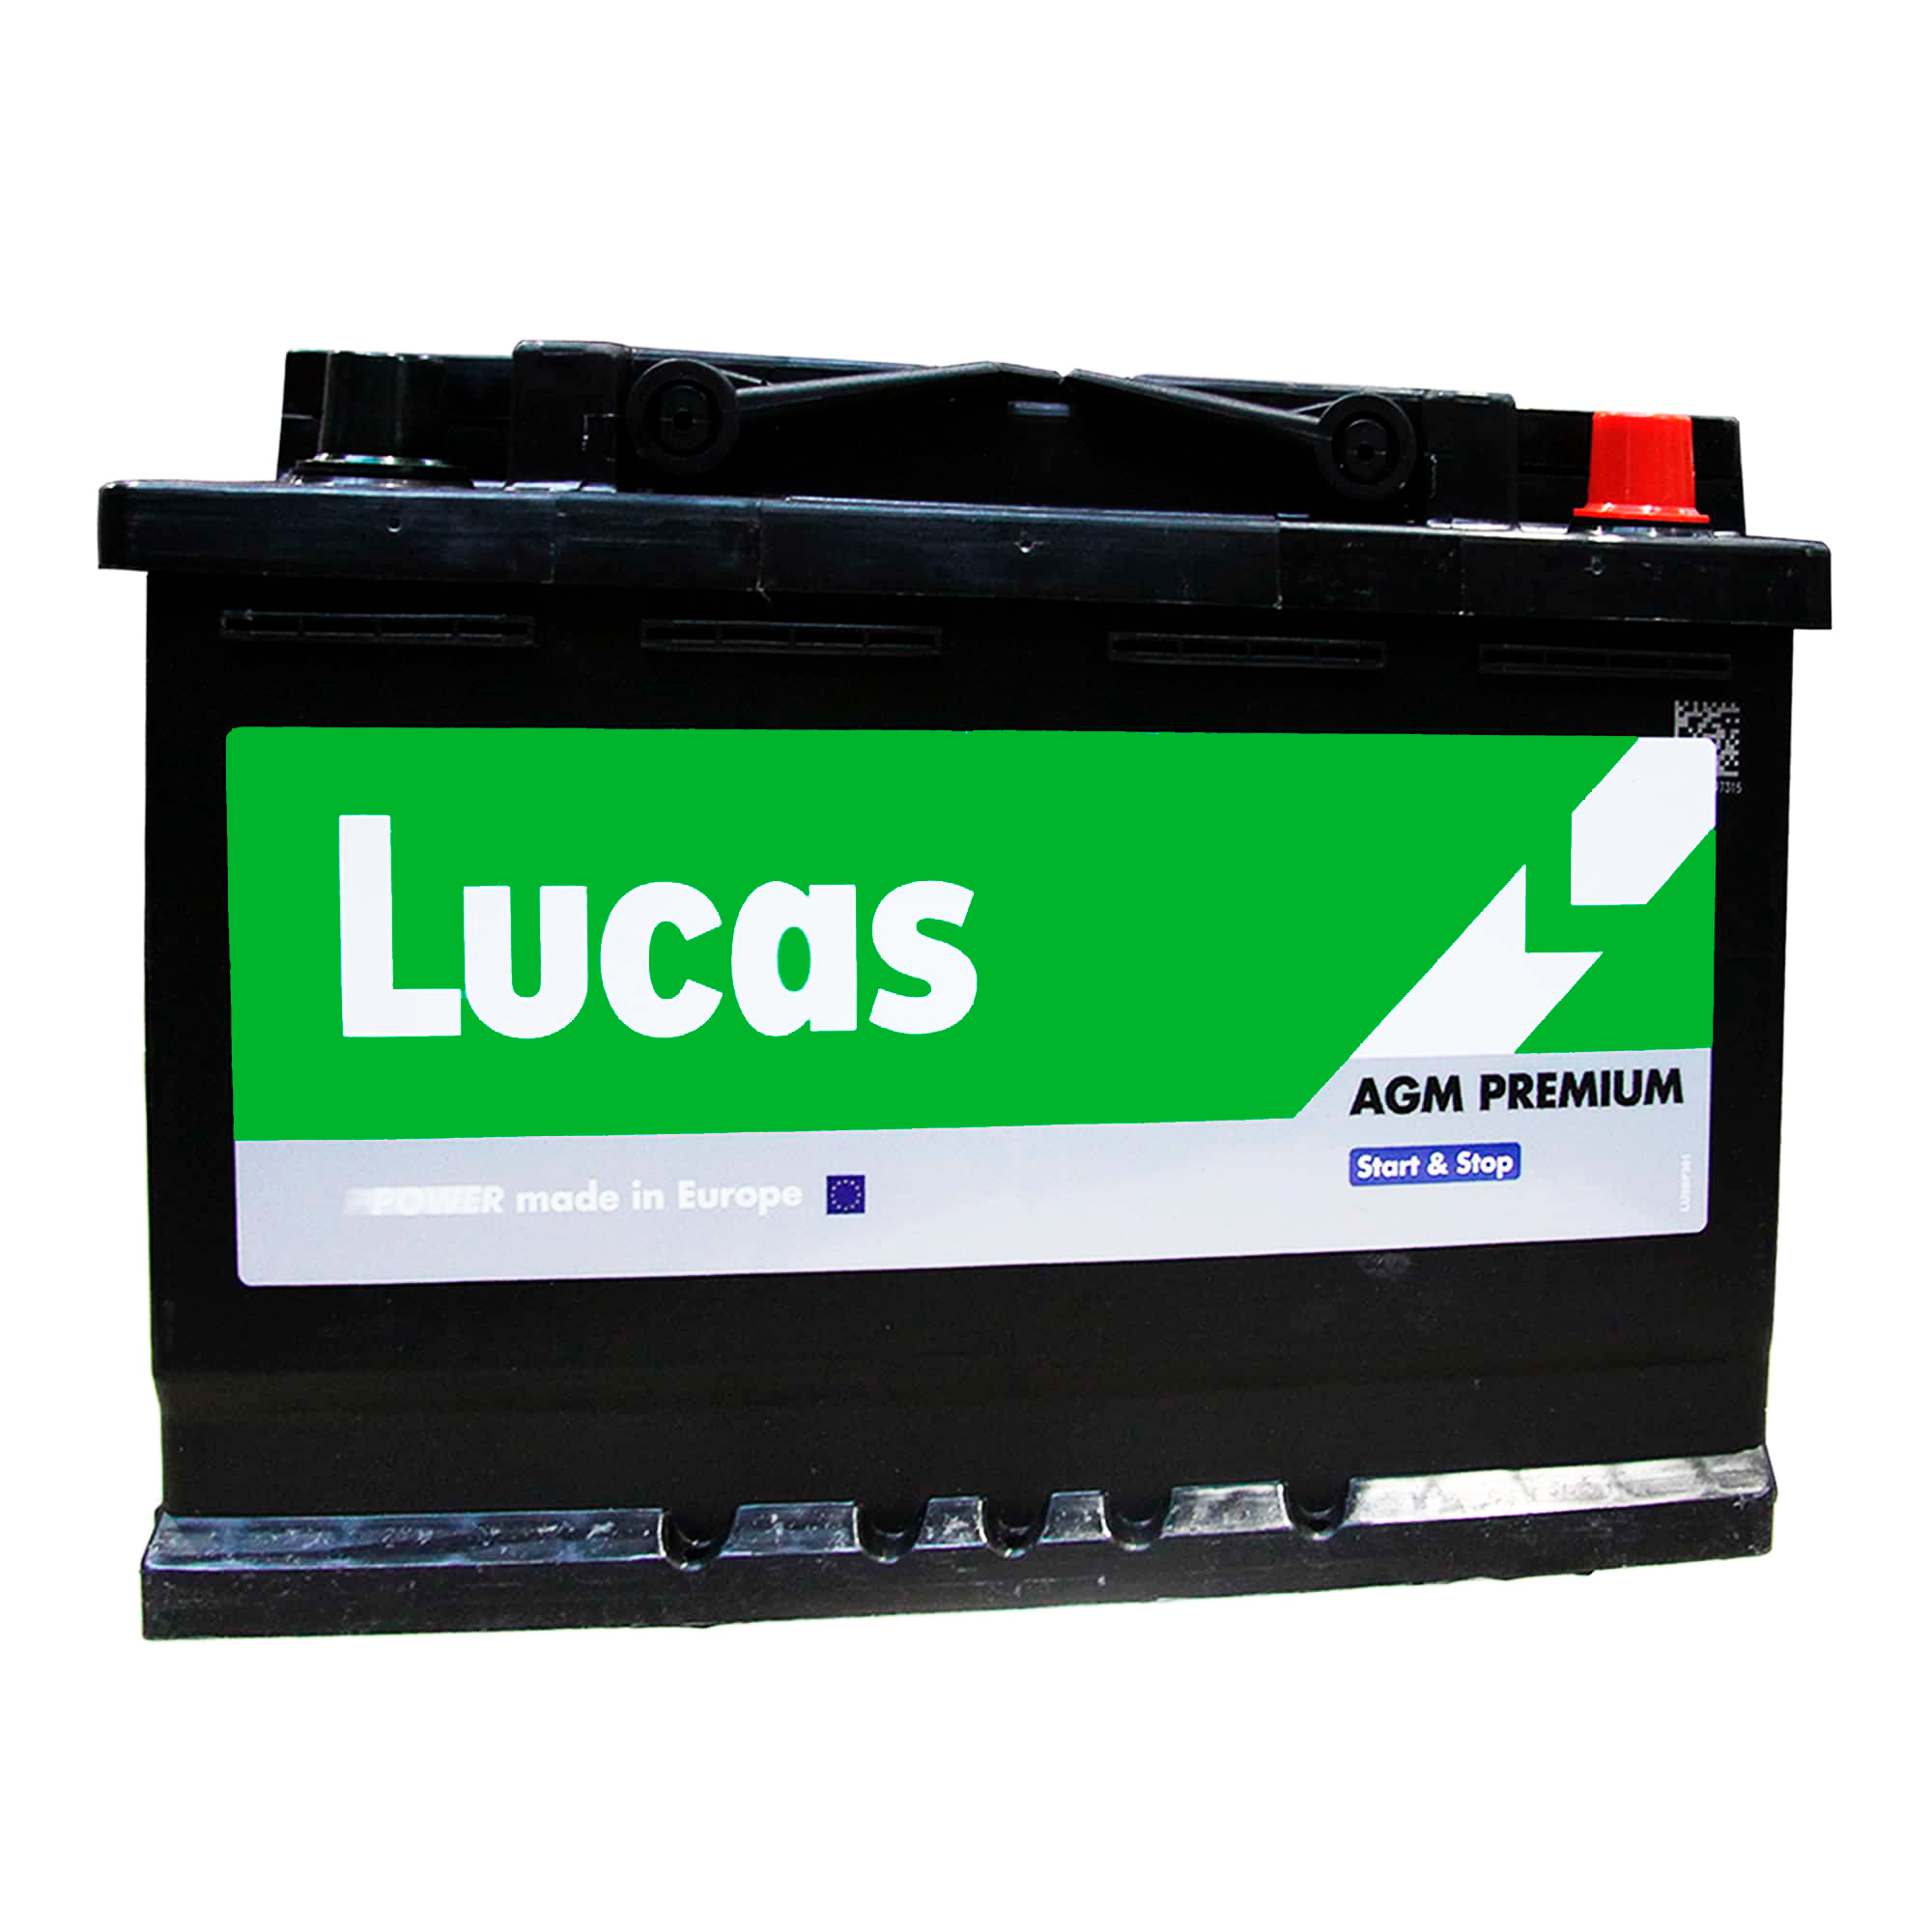 Аккумулятор Lucas (Batteries manufactured by Exide in Spain) 6CT-70Ah (-/+) AGM (LBAGM004A)